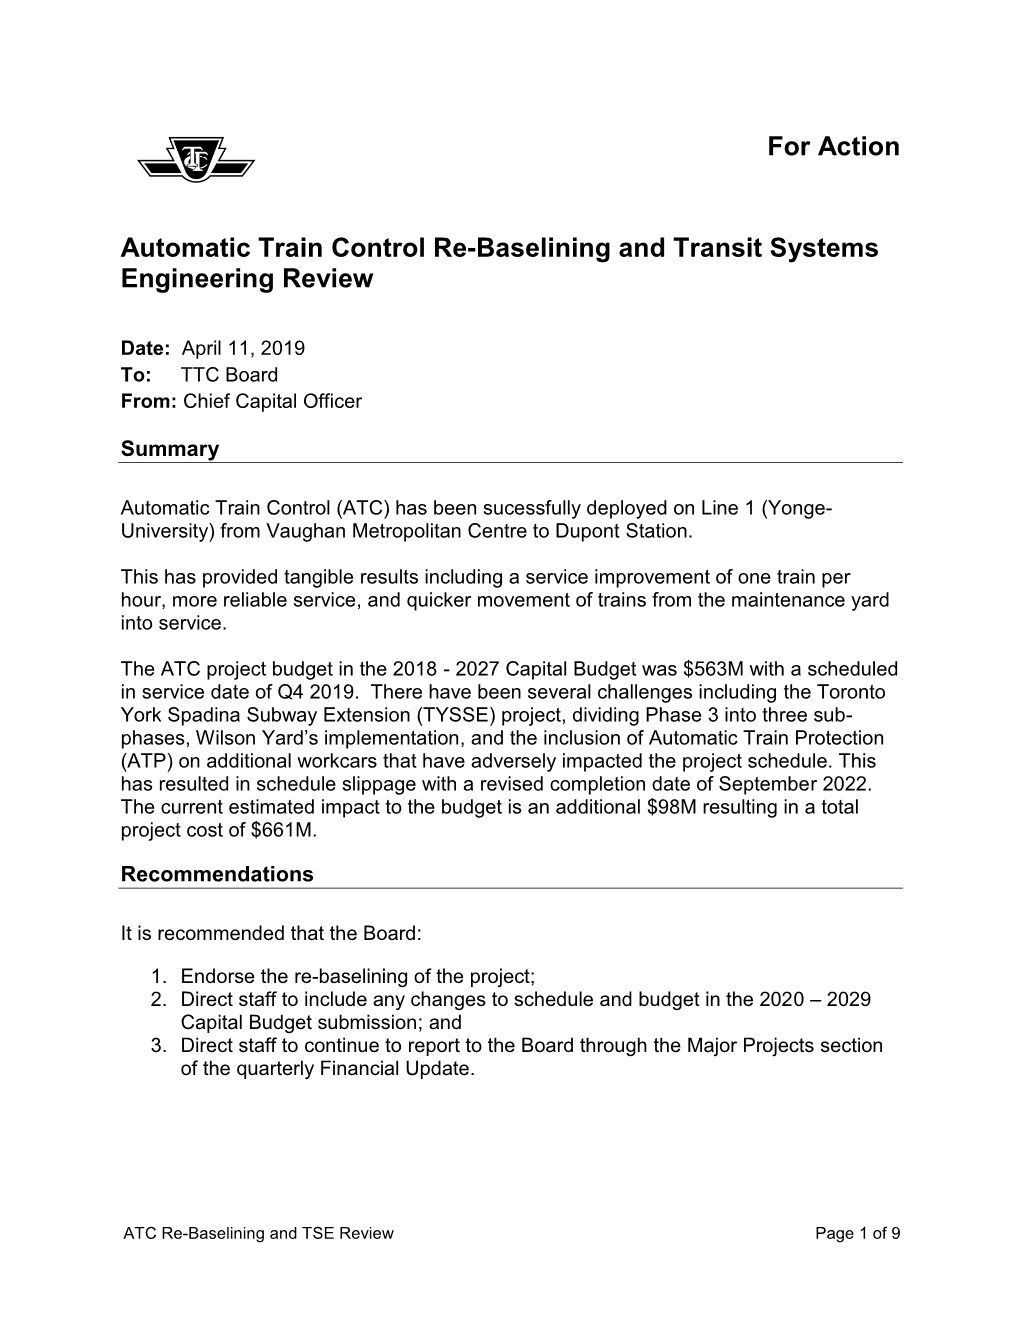 Automatic Train Control Re-Baselining and Transit Systems Engineering Review